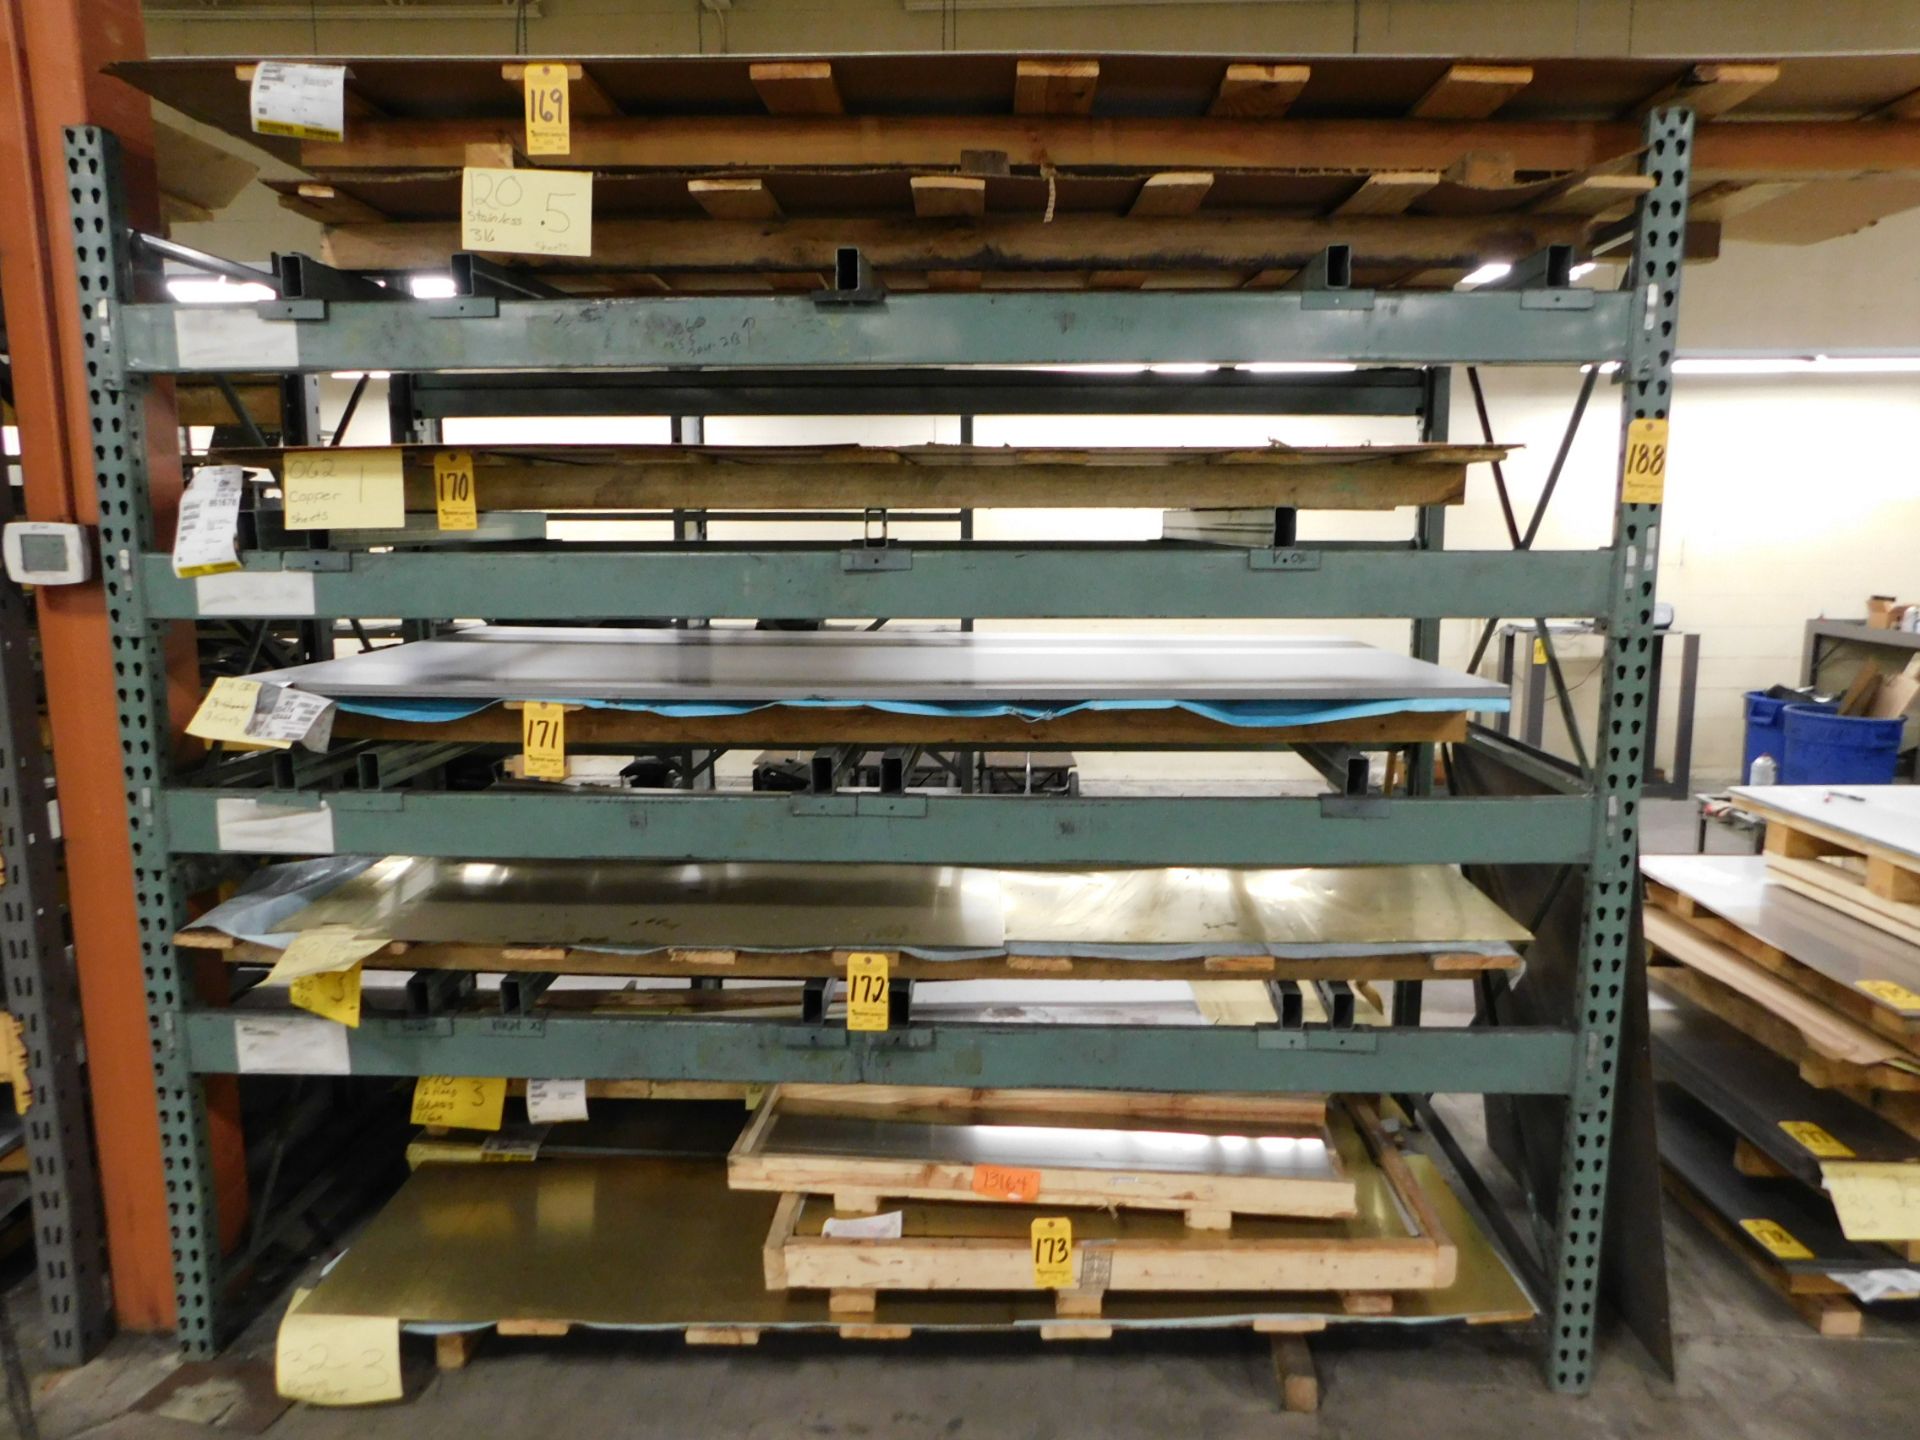 Pallet Shelving, (1) Section, 8 Ft. H x 9 Ft. W x 4 Ft. Deep